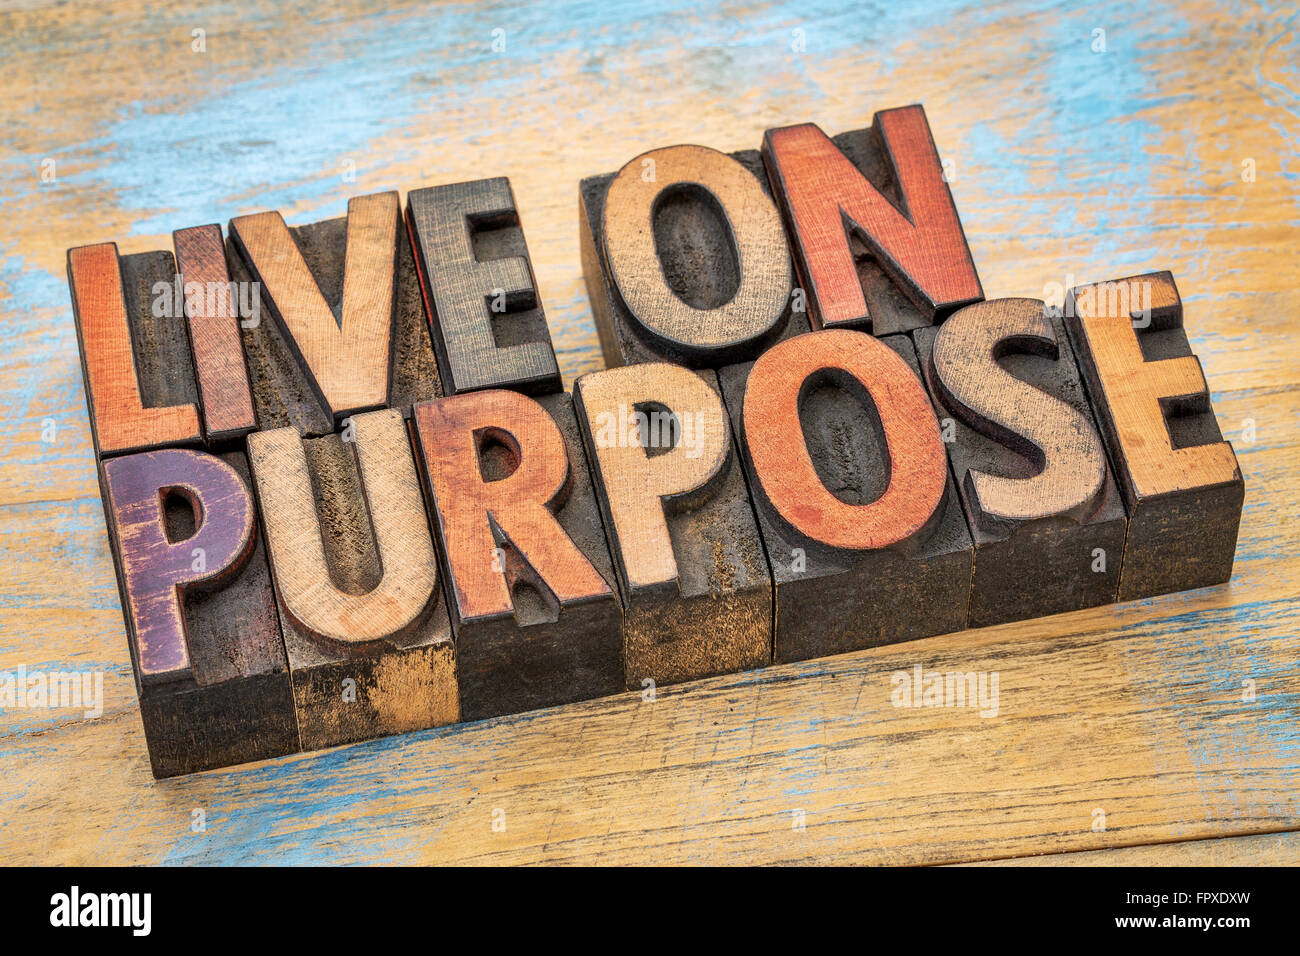 Live on purpose  banner - word abstract in vintage letterpress wood type printing blocks Stock Photo